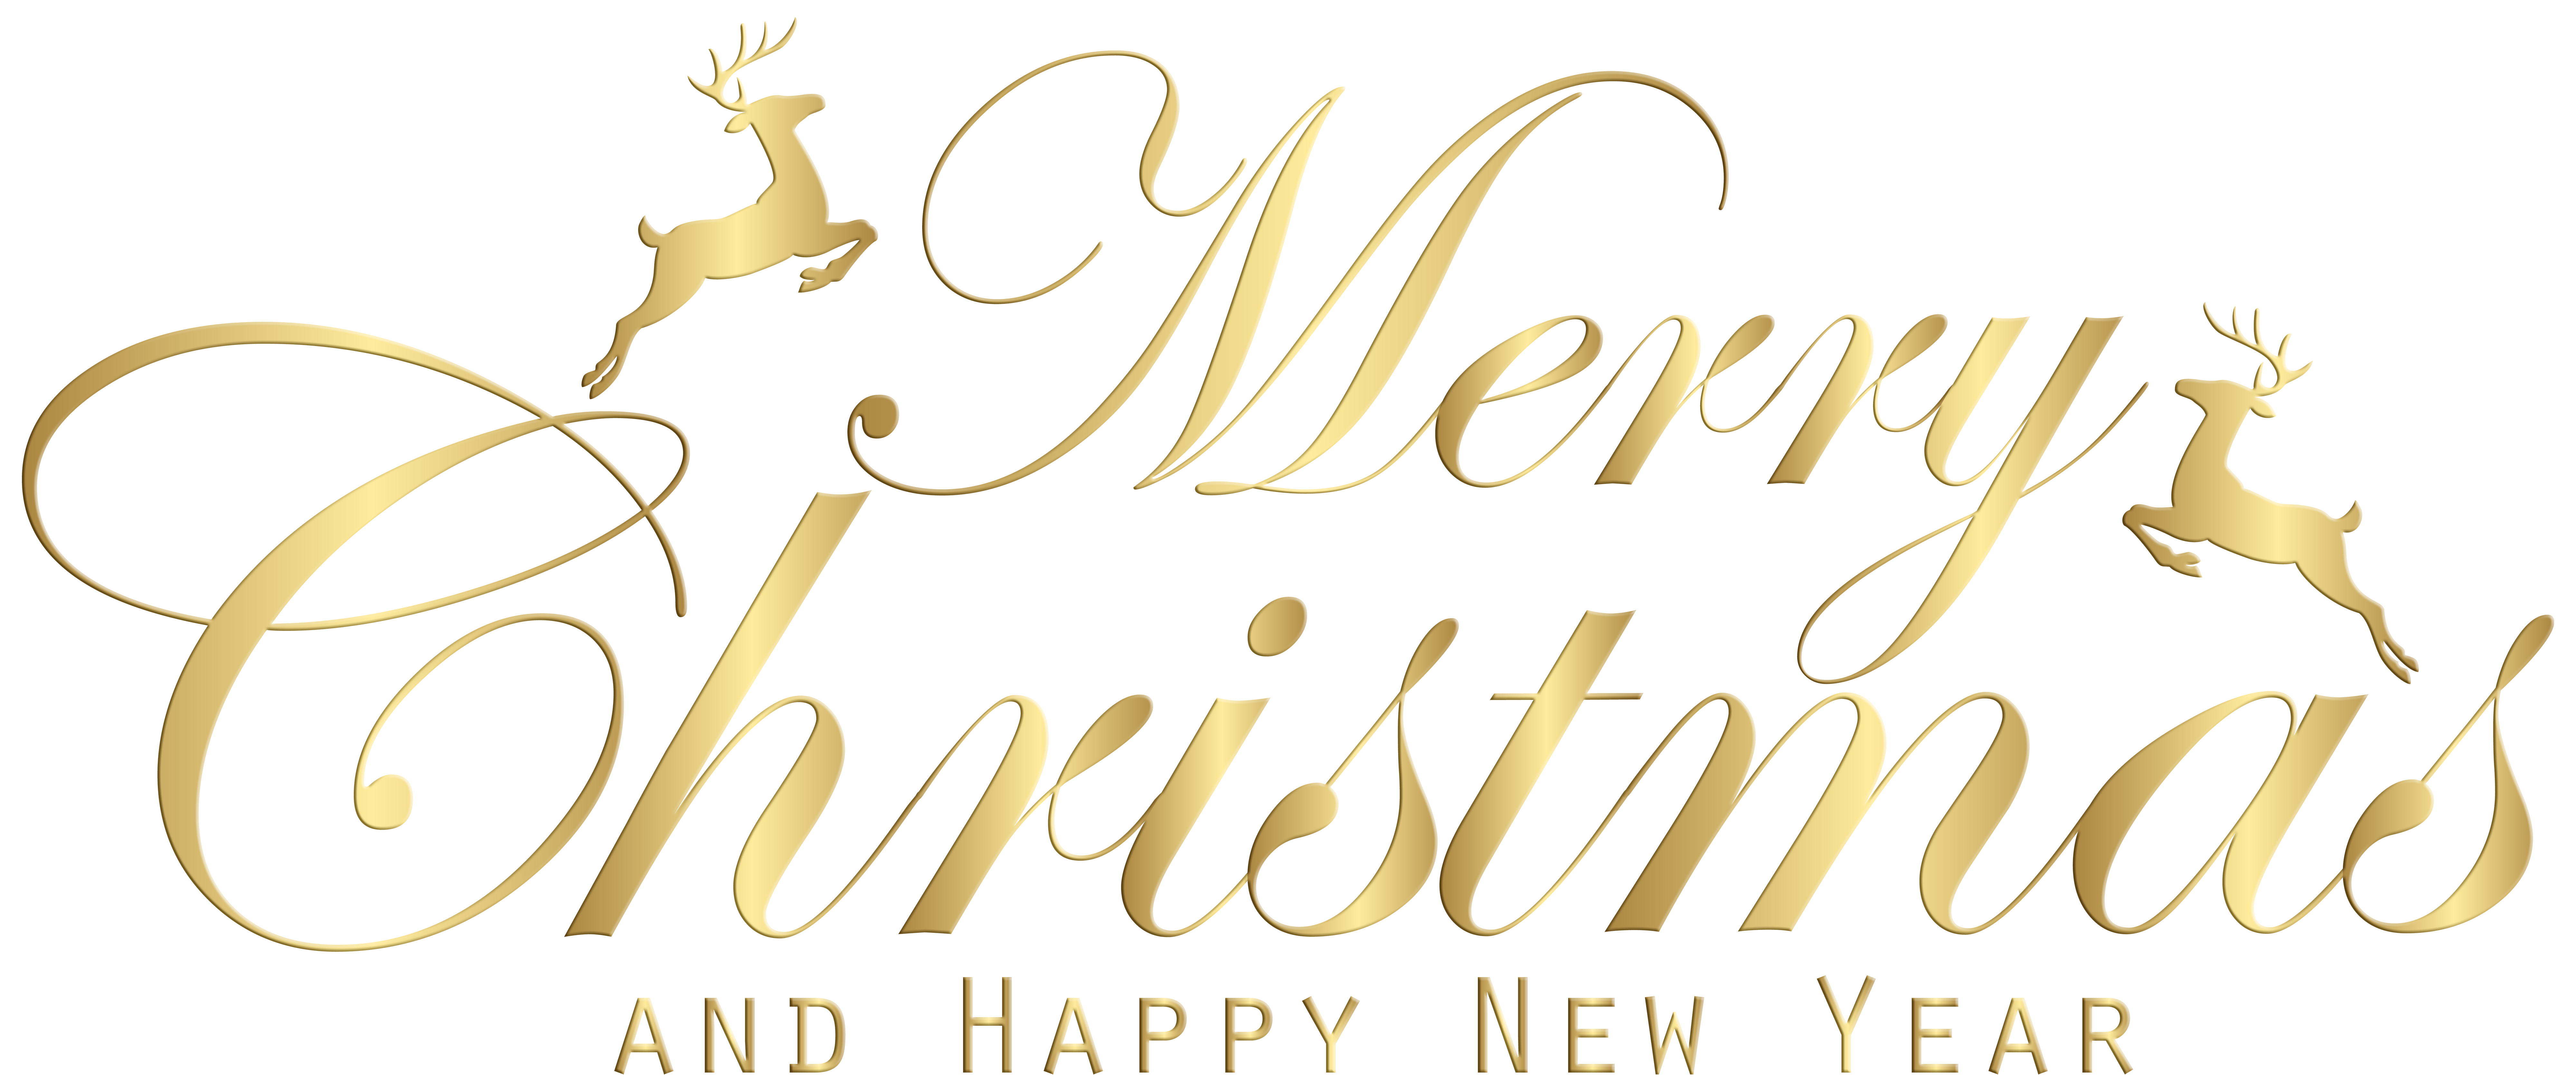 Merry Christmas Gold Transparent Clip Art Image | Gallery Yopriceville - High-Quality Images and ...